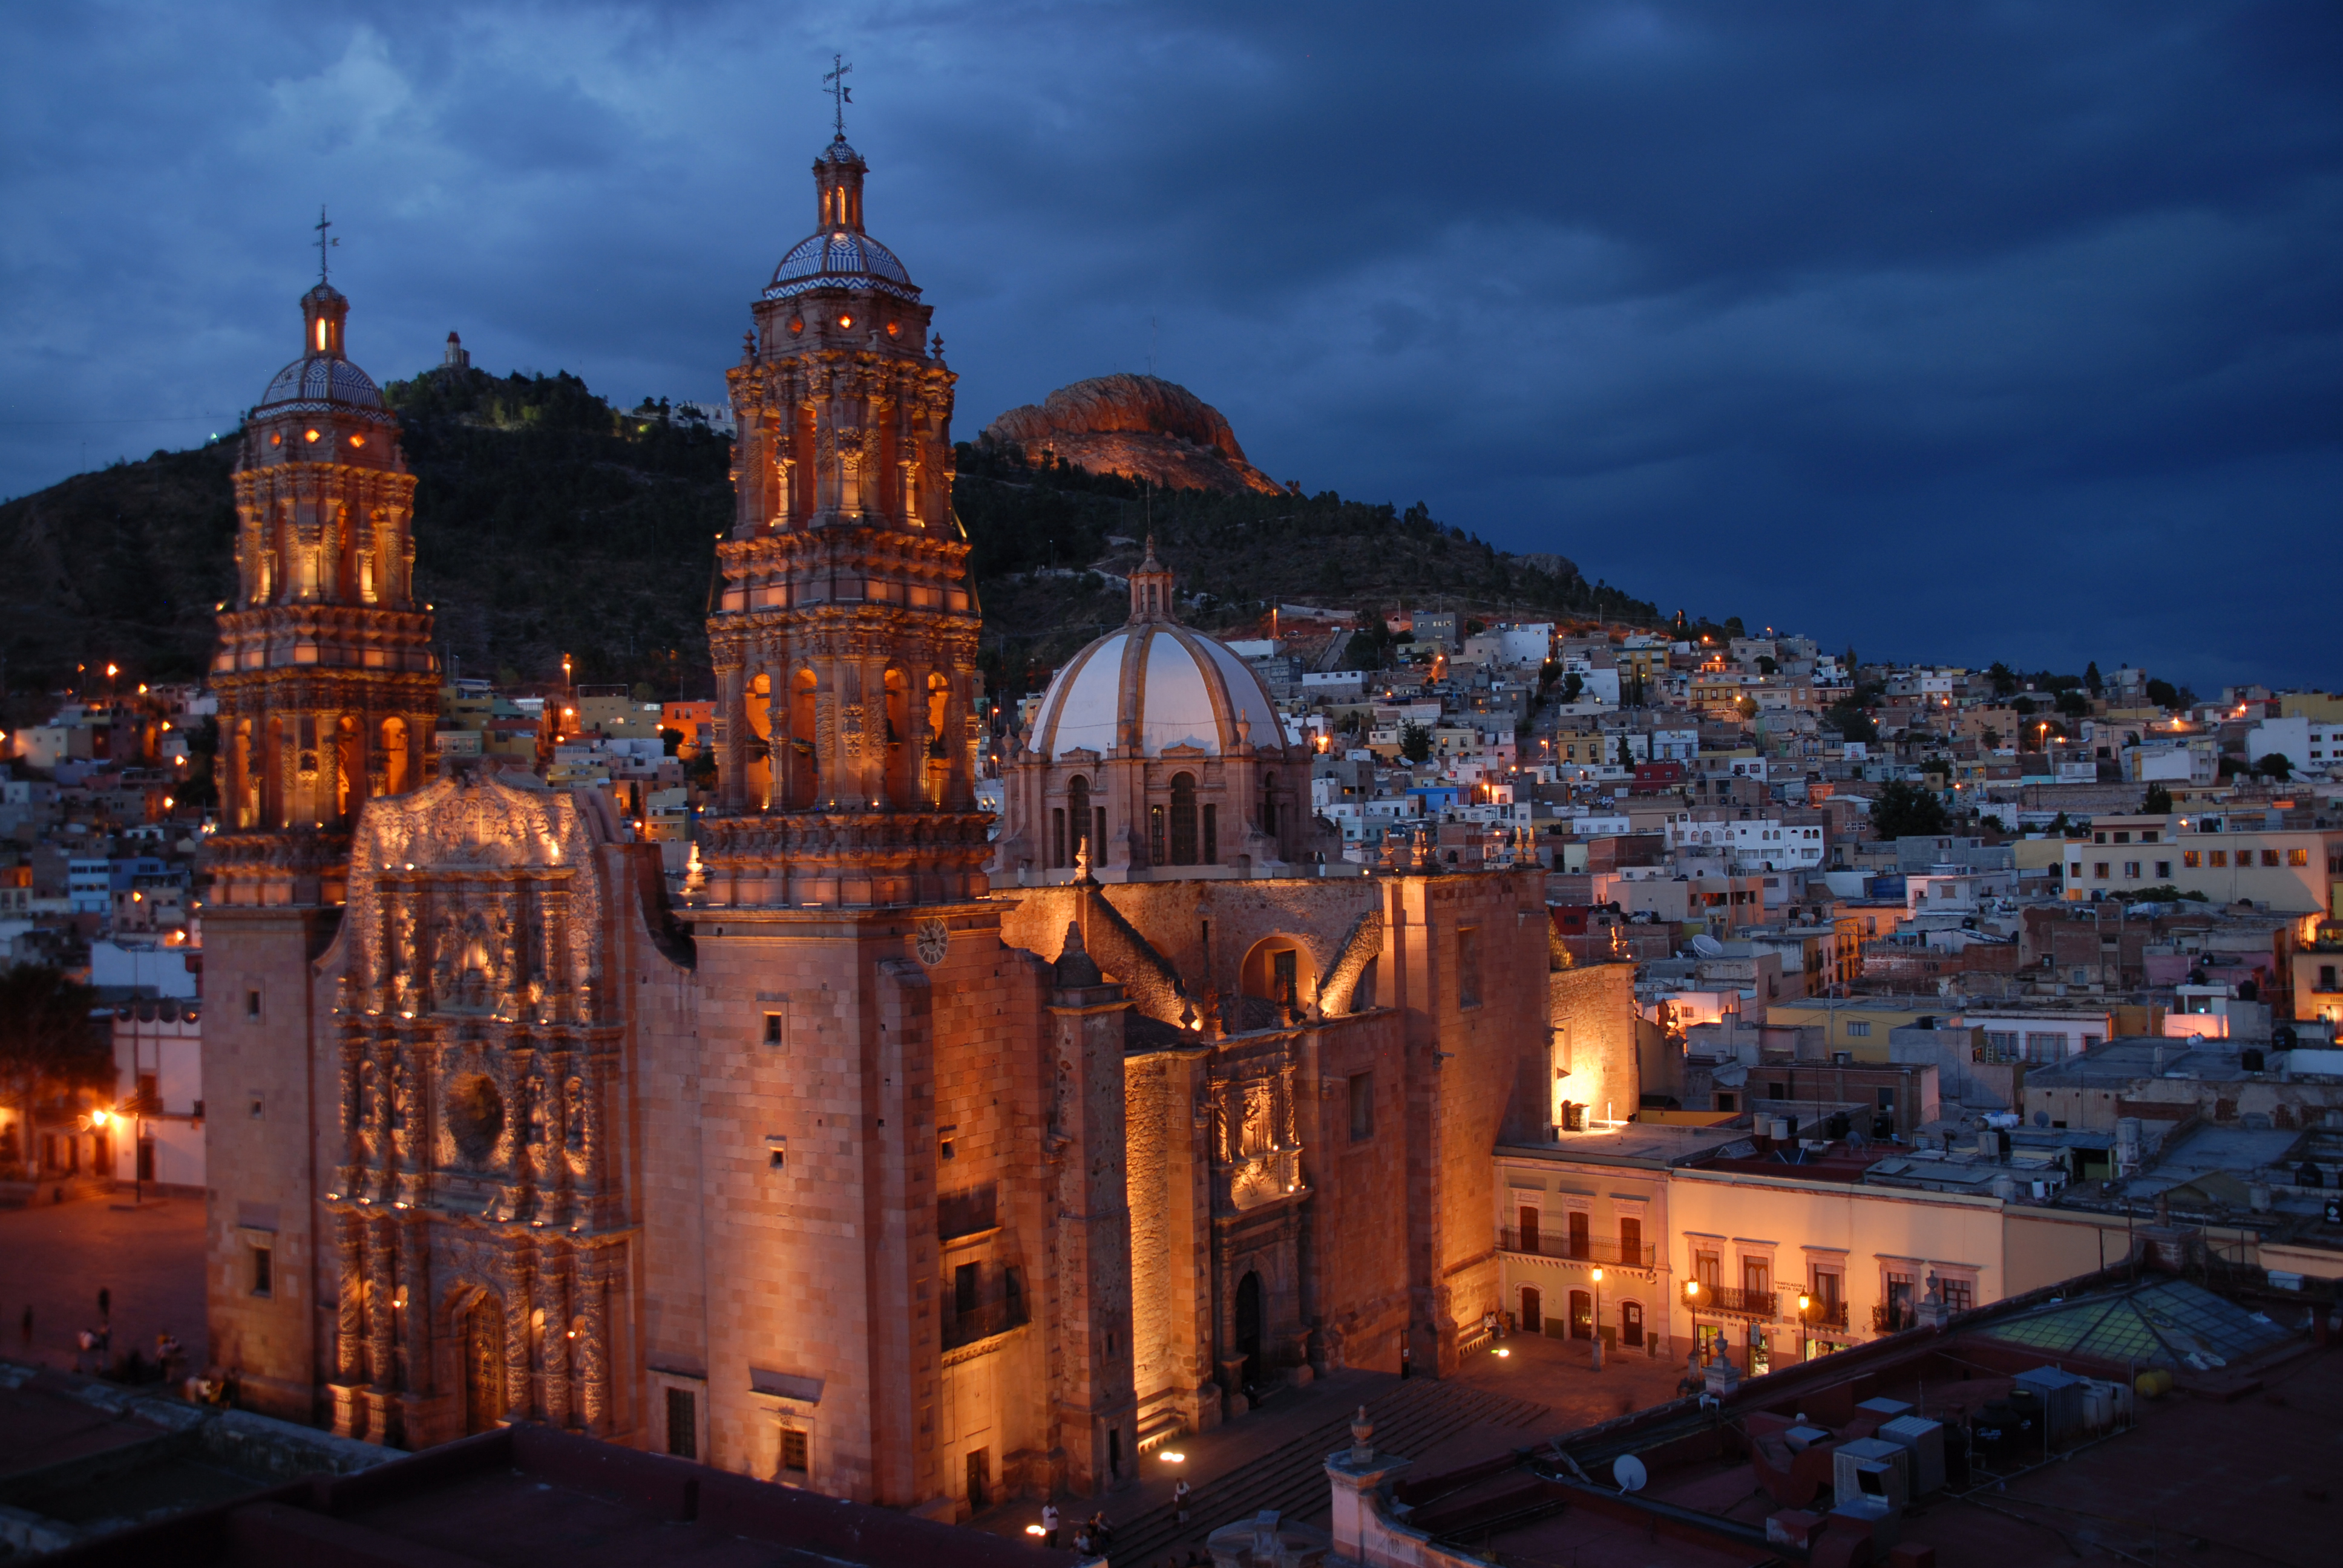 Catedral Zacatecas with lights during evening time